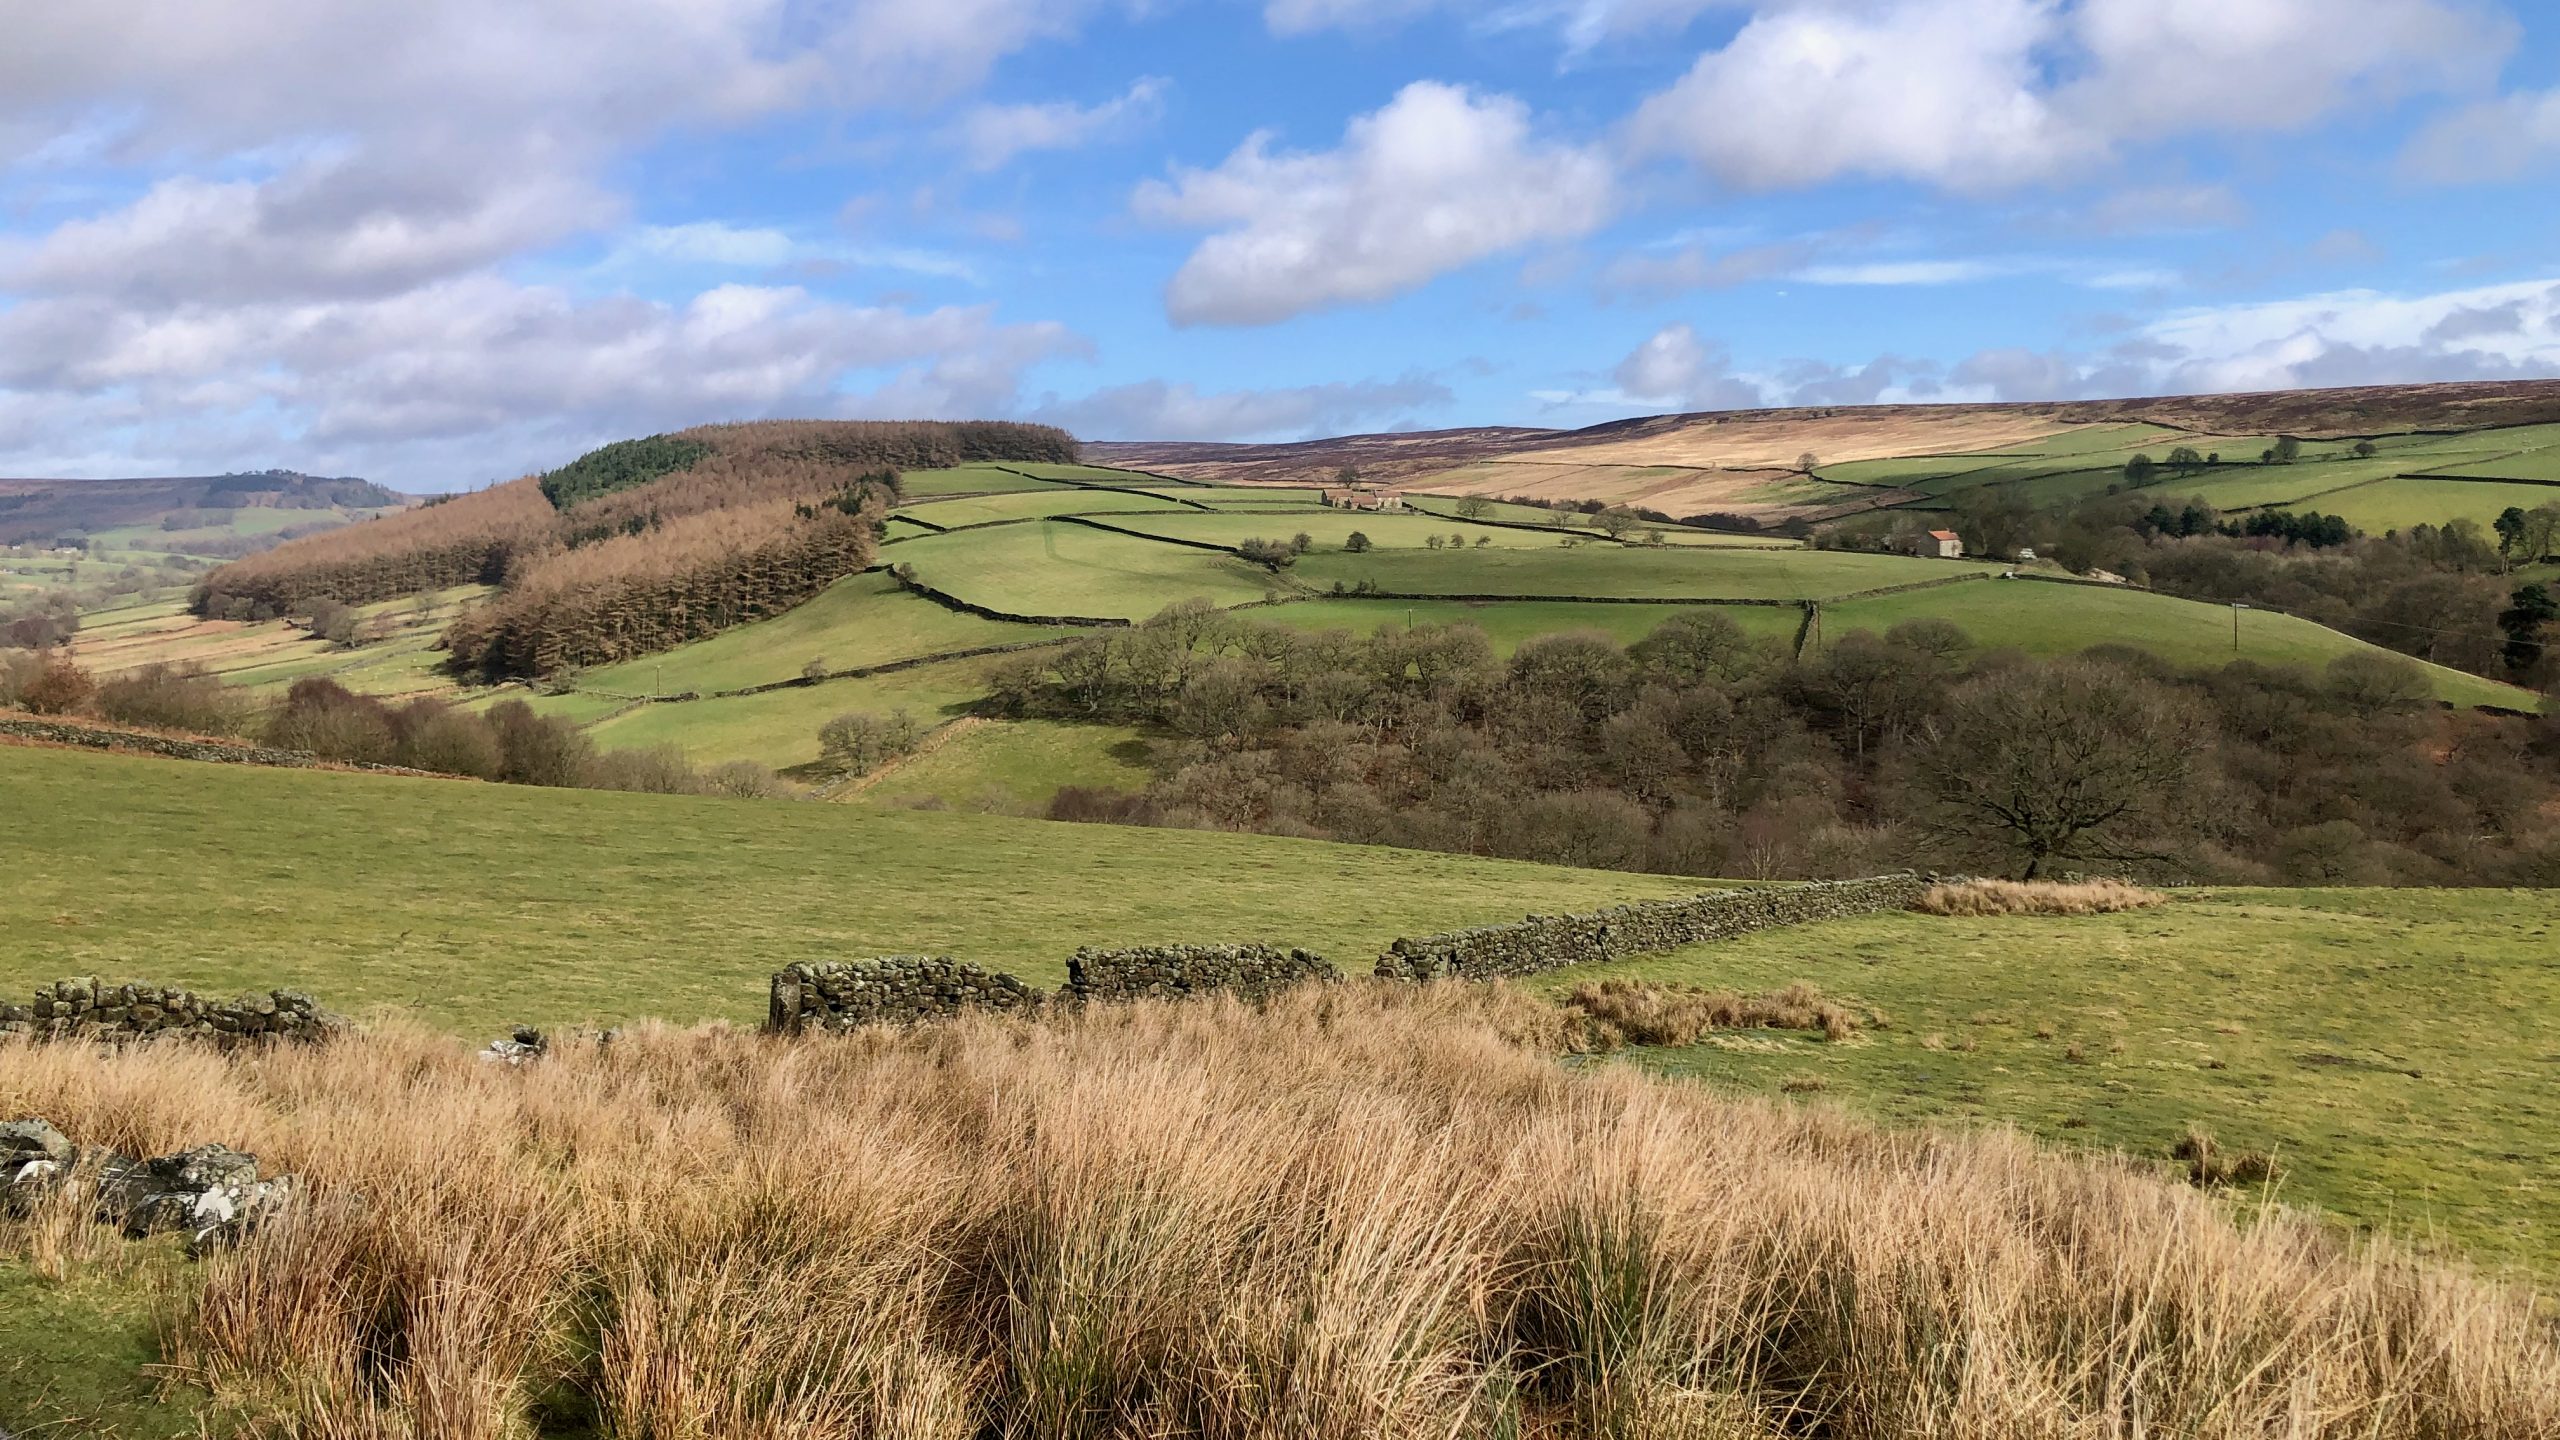 A view across lower Bransdale from Stork House to the twin farms of High and Low Lidmoor. Deciduous trees line the bottom of the dale whilst on the high ground to the left is a commercial coniferous plantation.